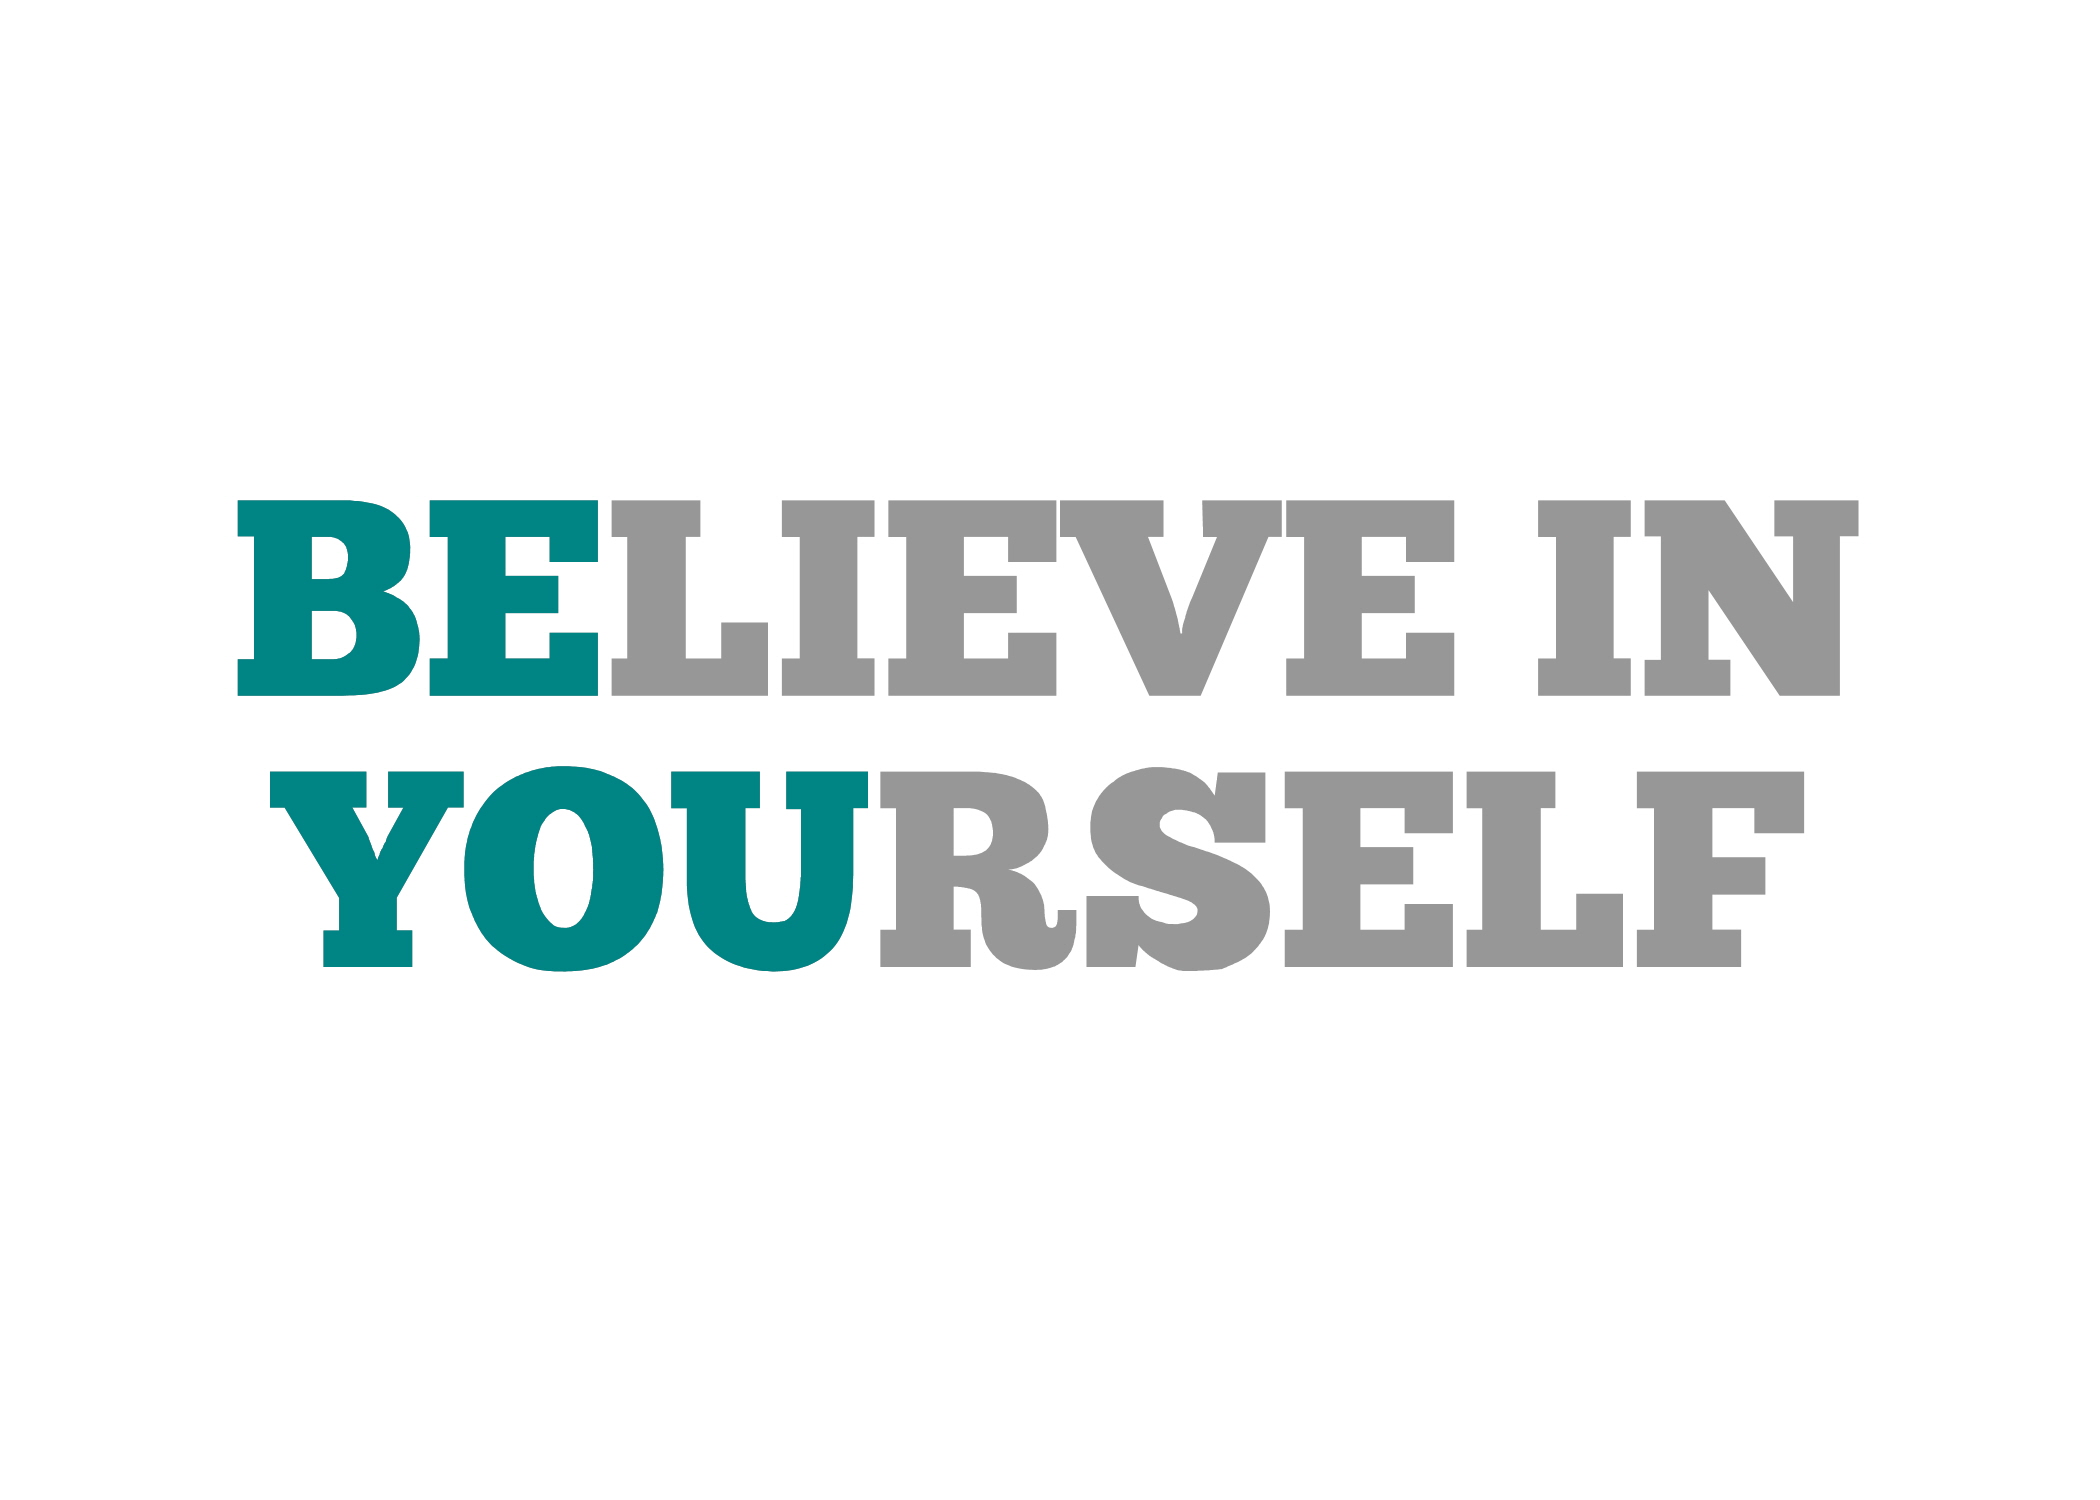 Because you believe. Believe in yourself. Картинка belive in yur Salf. Believe in yourself картинки. Обои believe in yourself.